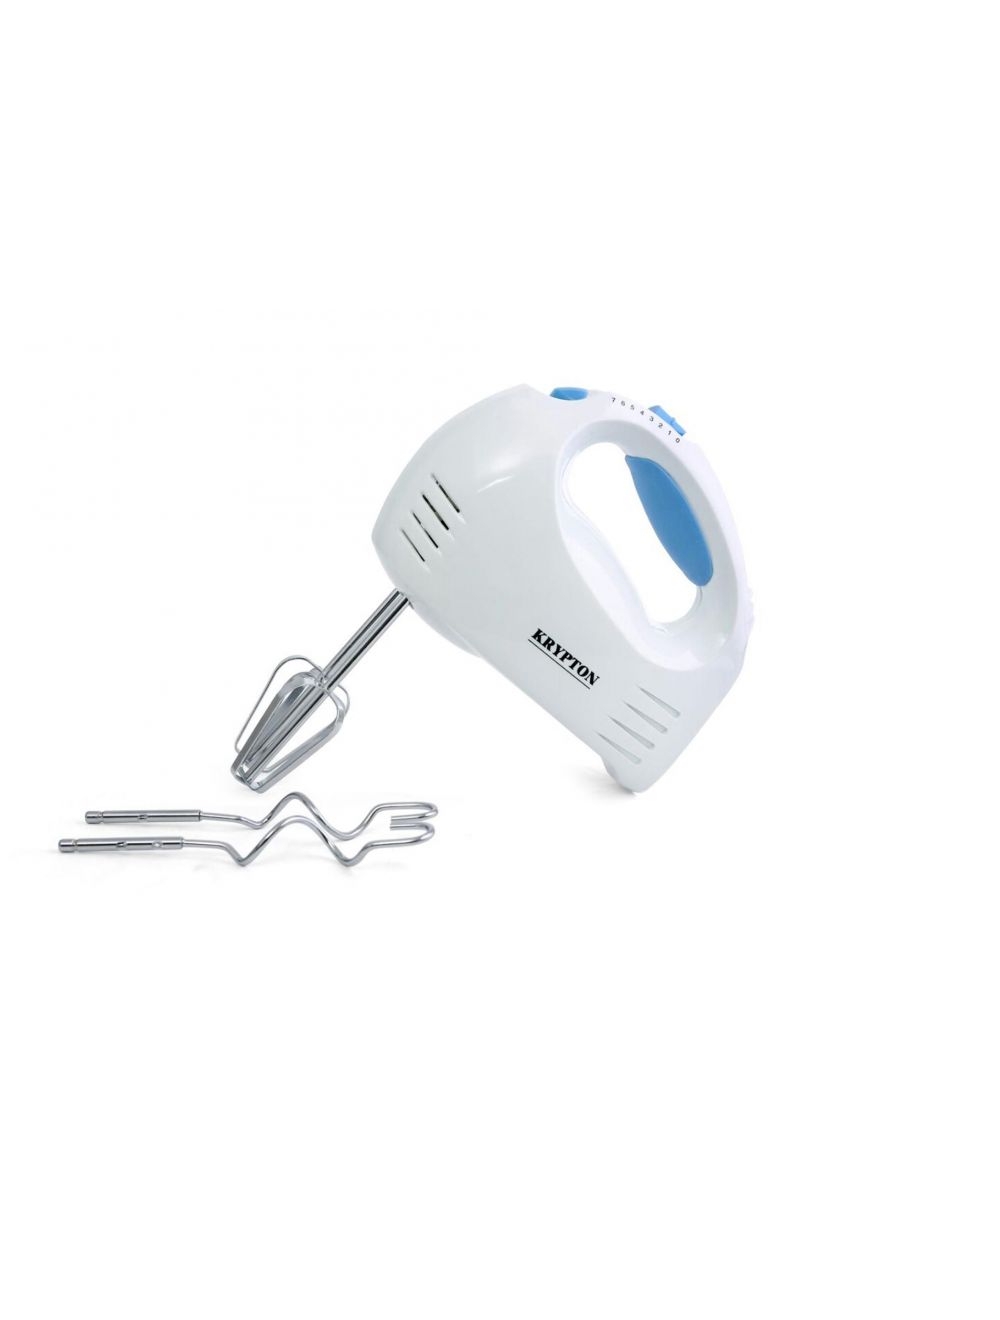 Geepas 150W Hand Mixer Professional Electric Handheld Food Collection 